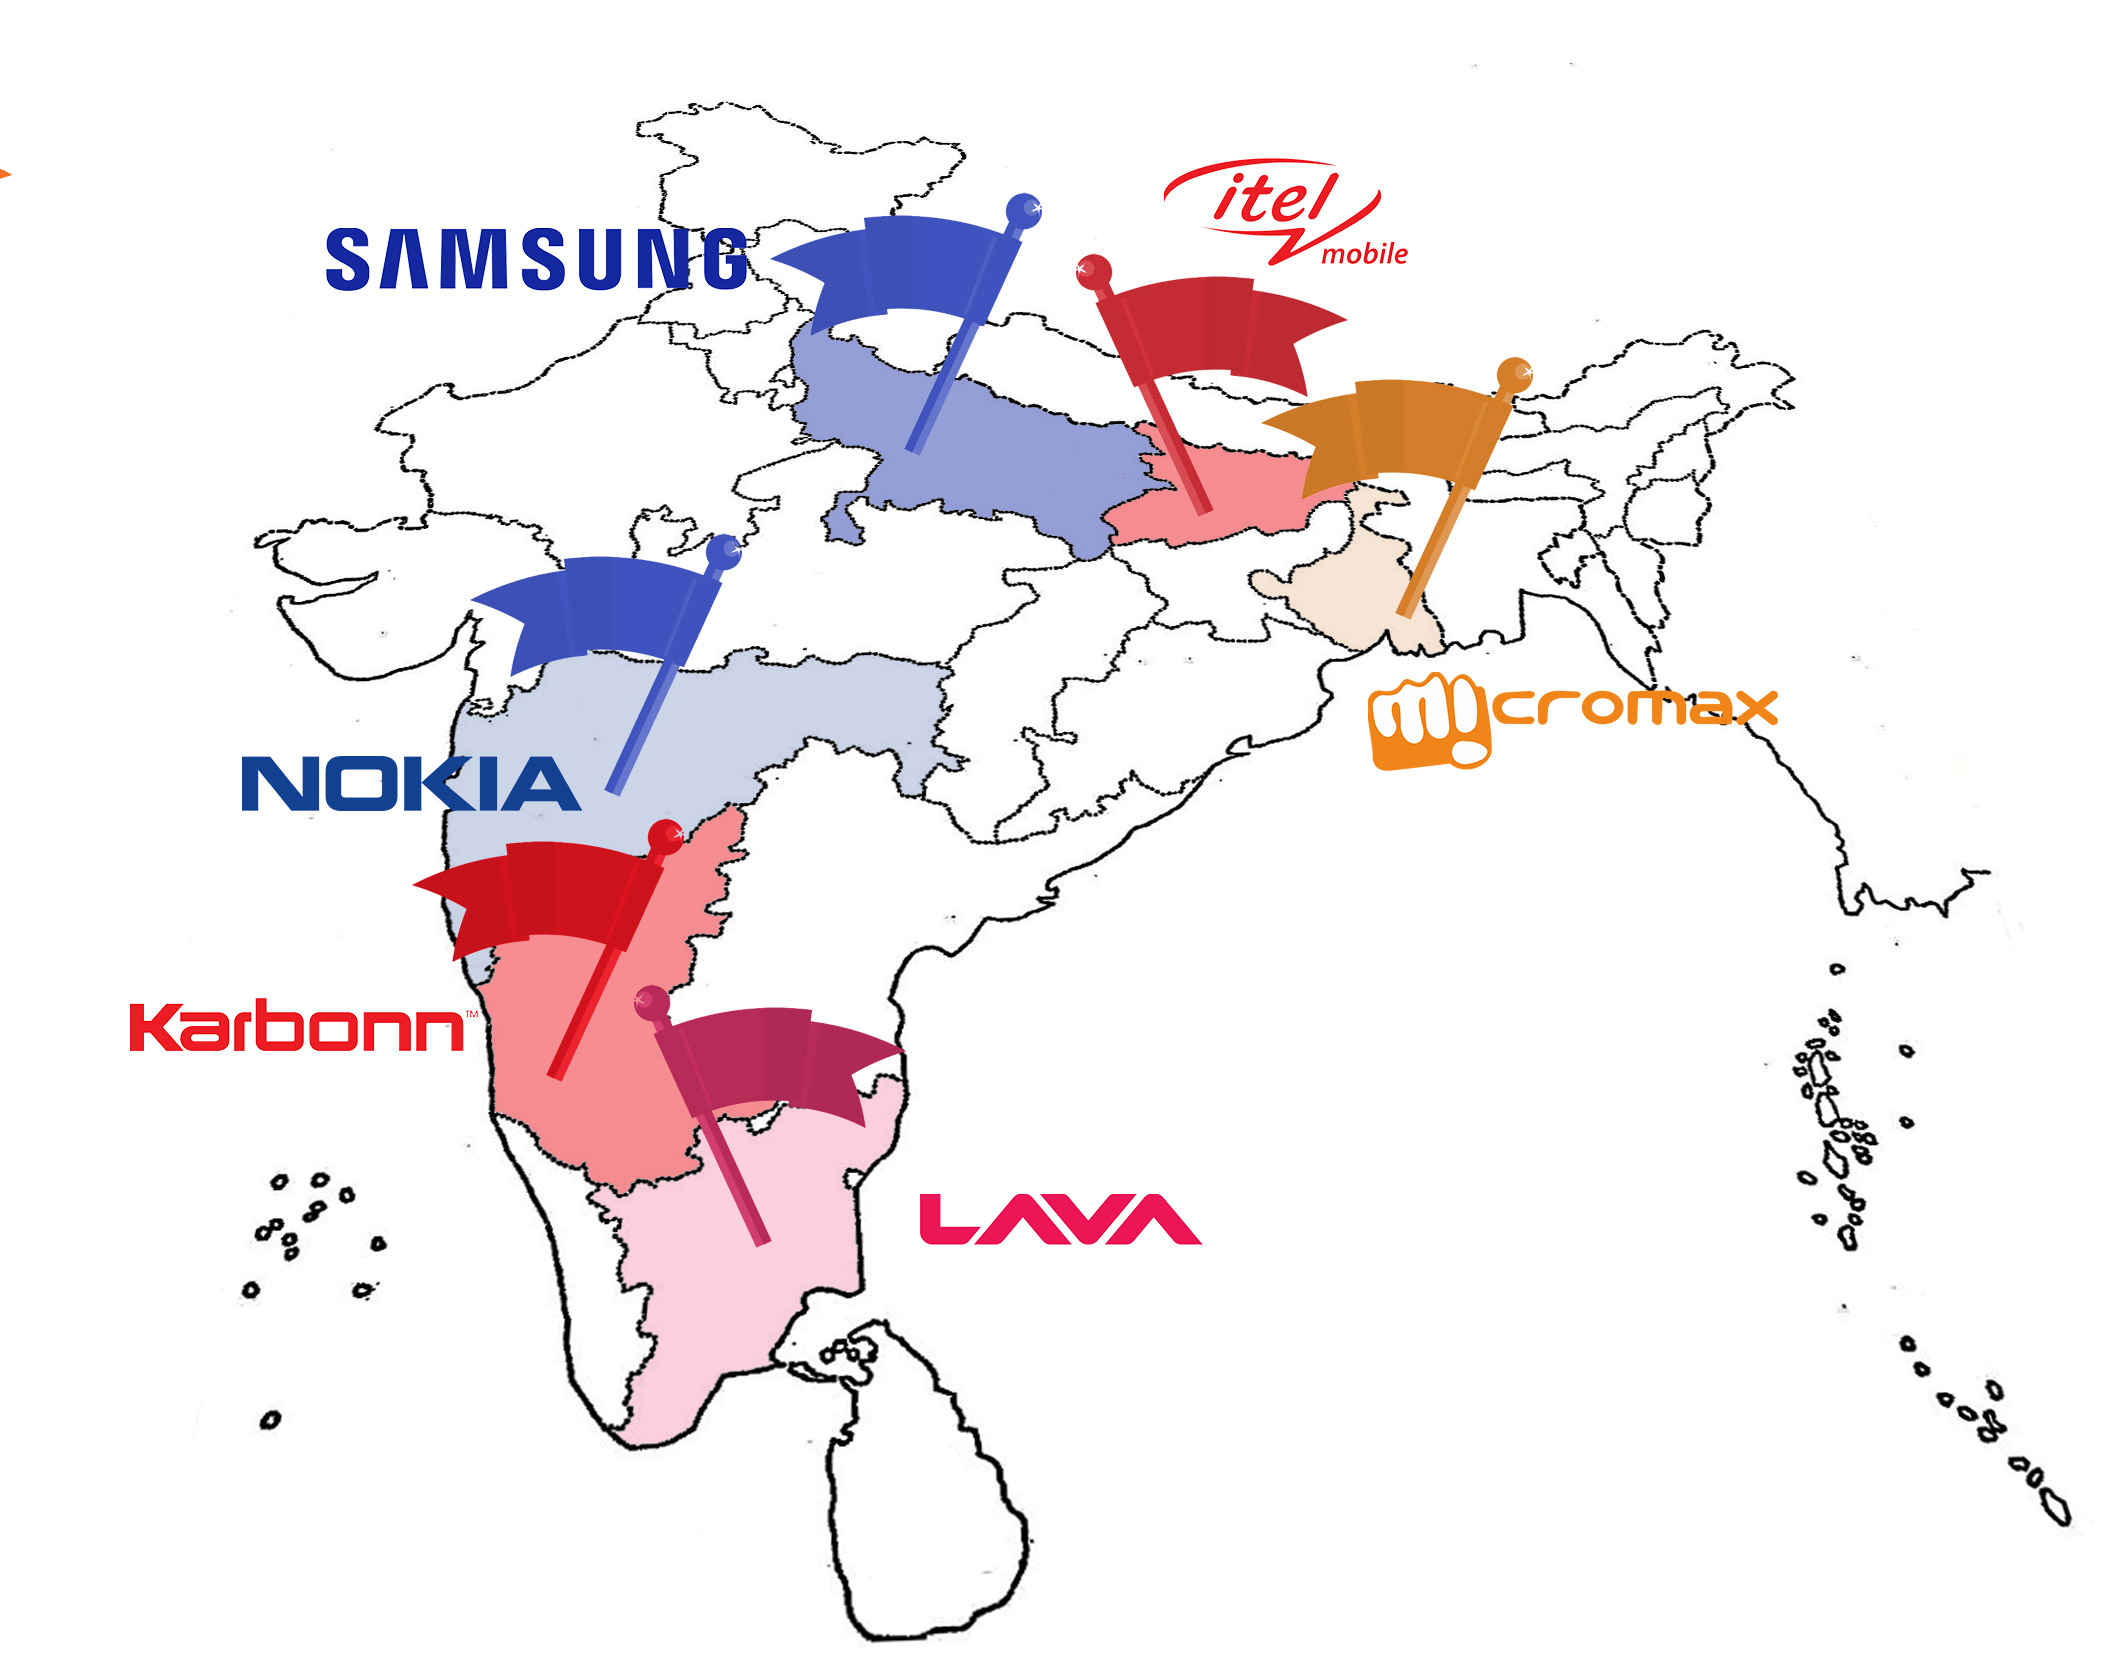 Feature Phones  fuel a Connected and Digital India